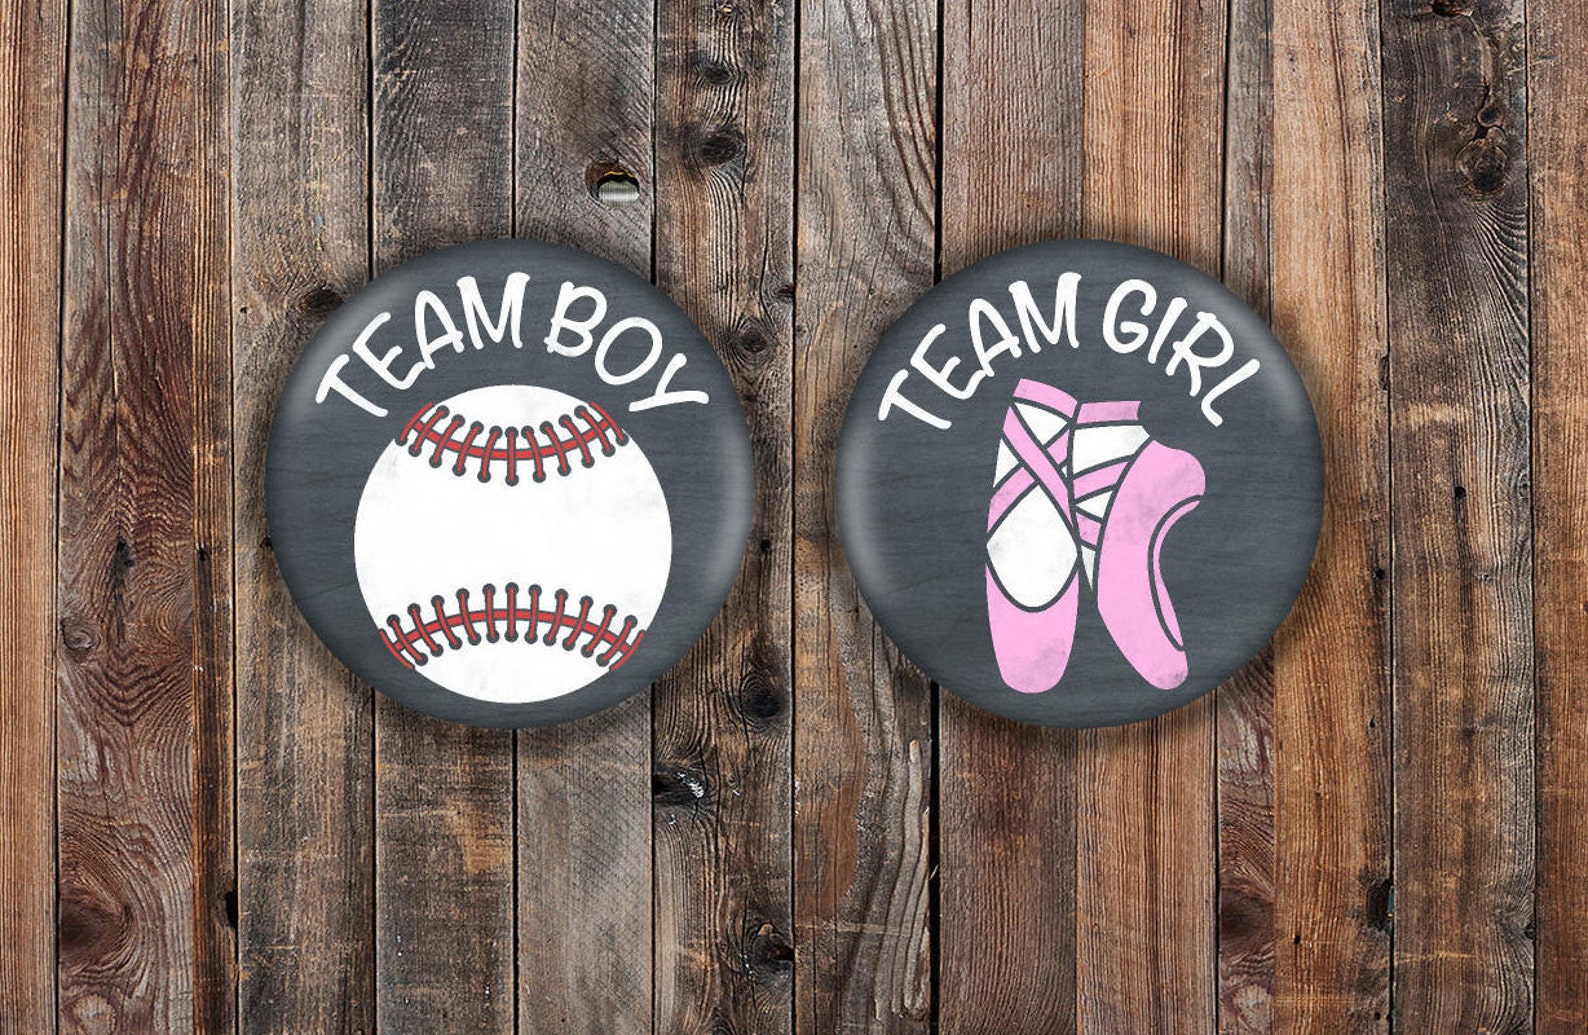 team boy and team girl baseball and ballet slippers gender reveal pins white baseball with red threads and pink ballet shoes